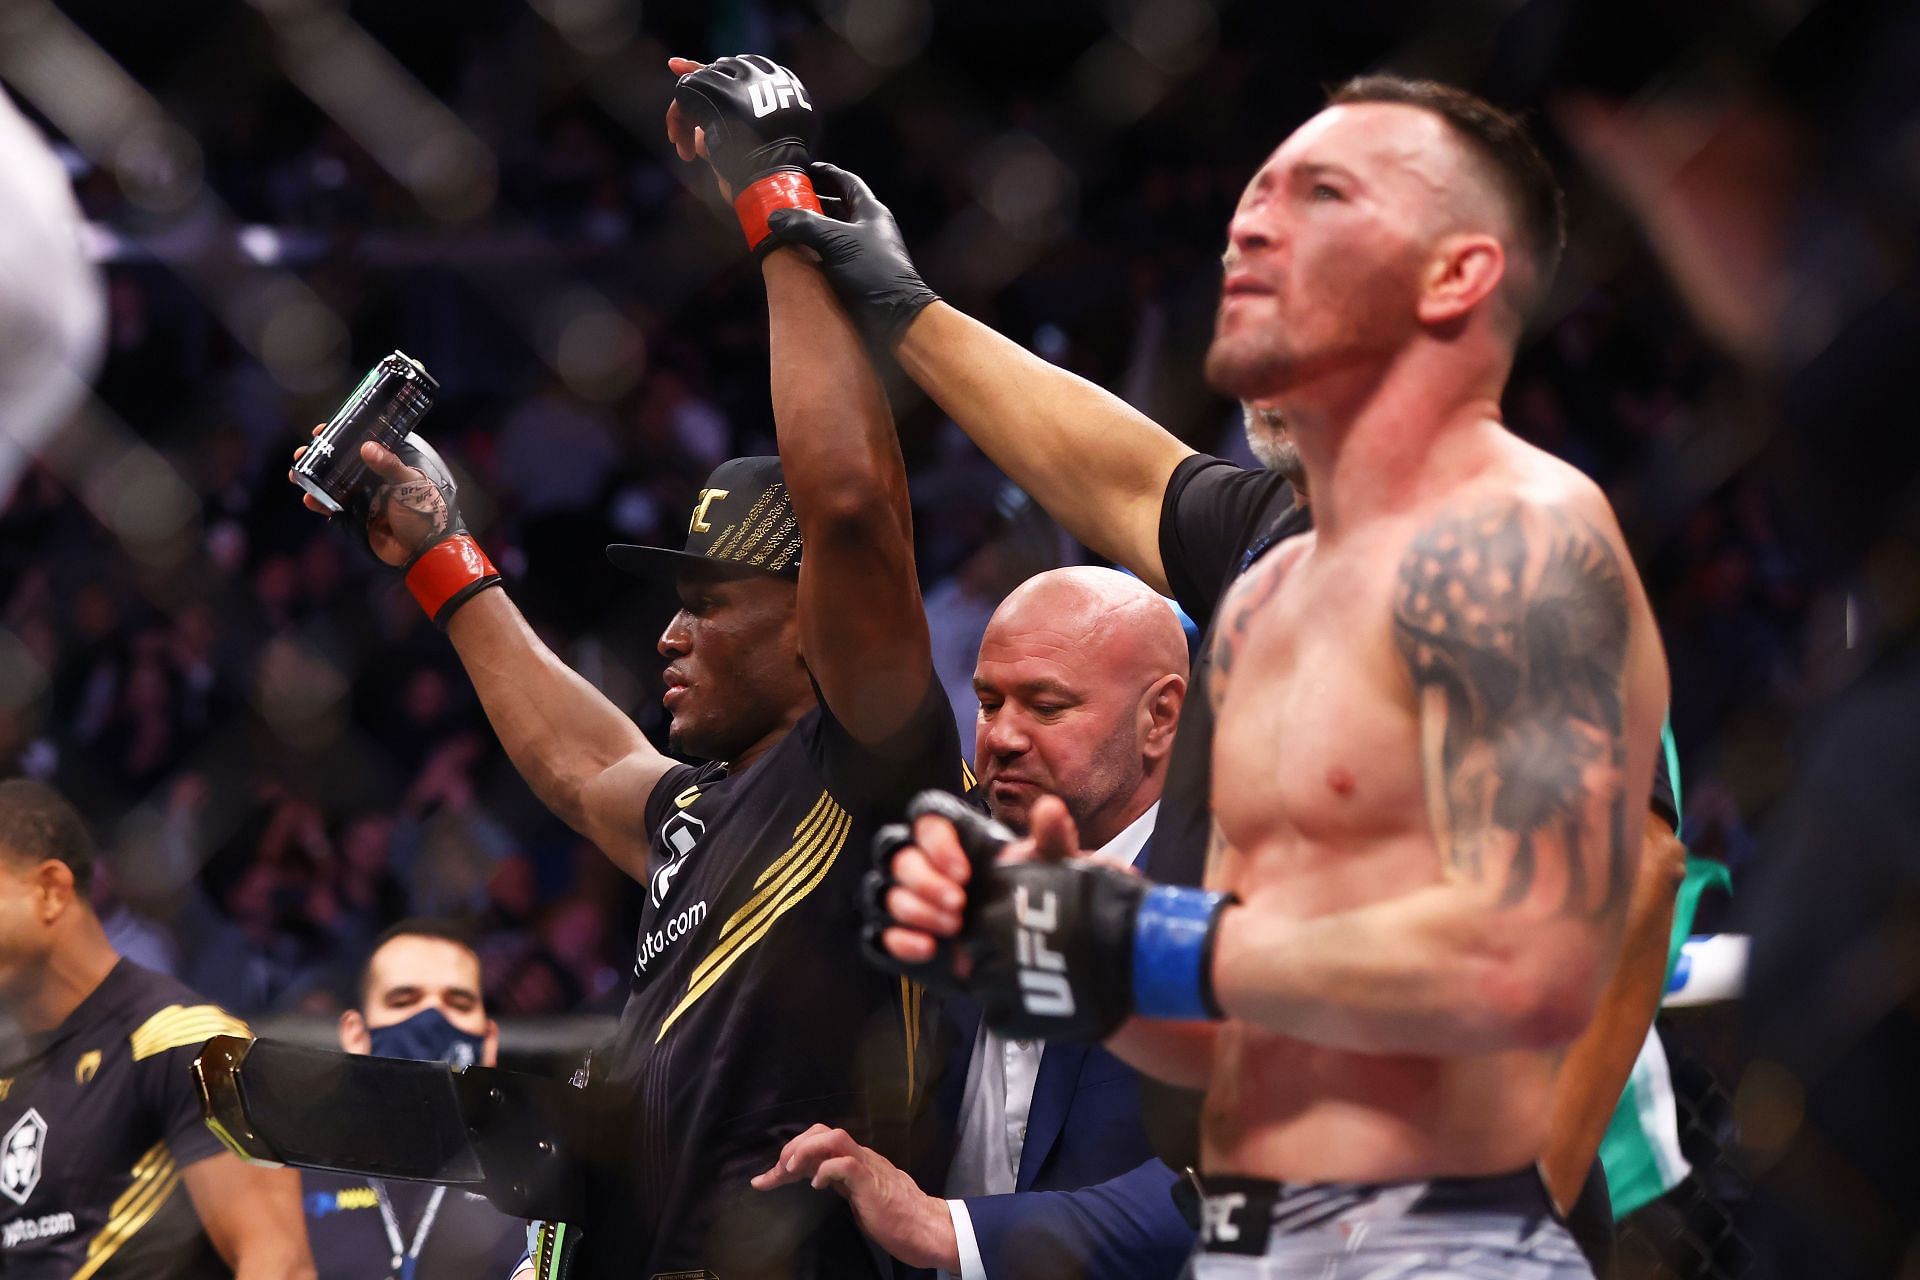 At UFC 268, Kamaru Usman ended his rivalry with Colby Covington via Unanimous Decision